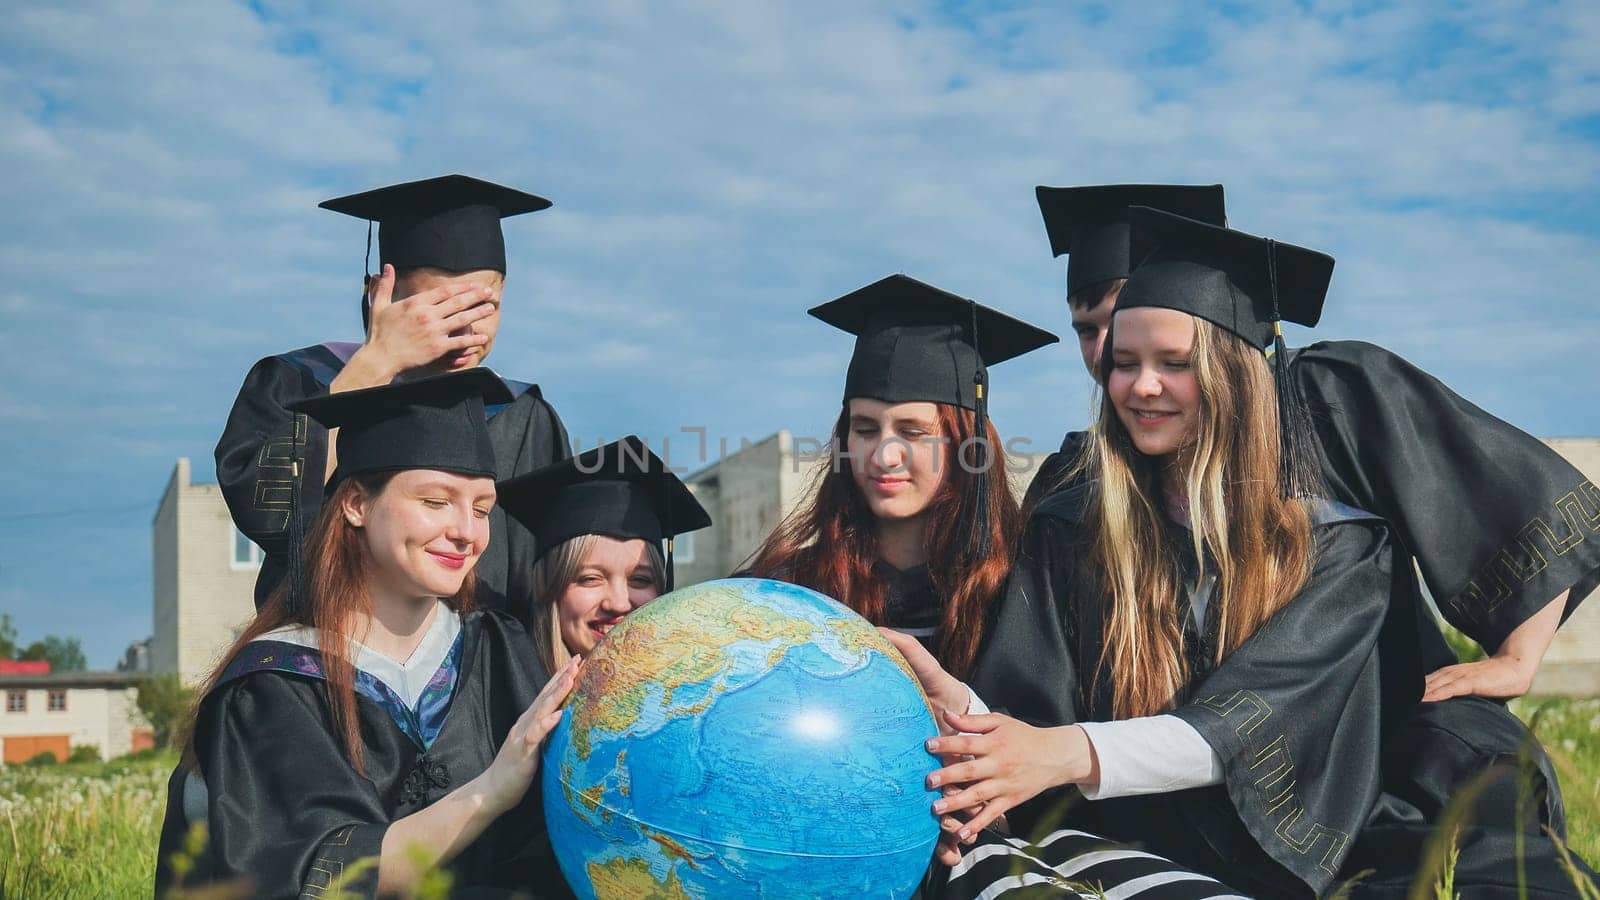 Graduates in black robes examine a geographical globe sitting on the grass